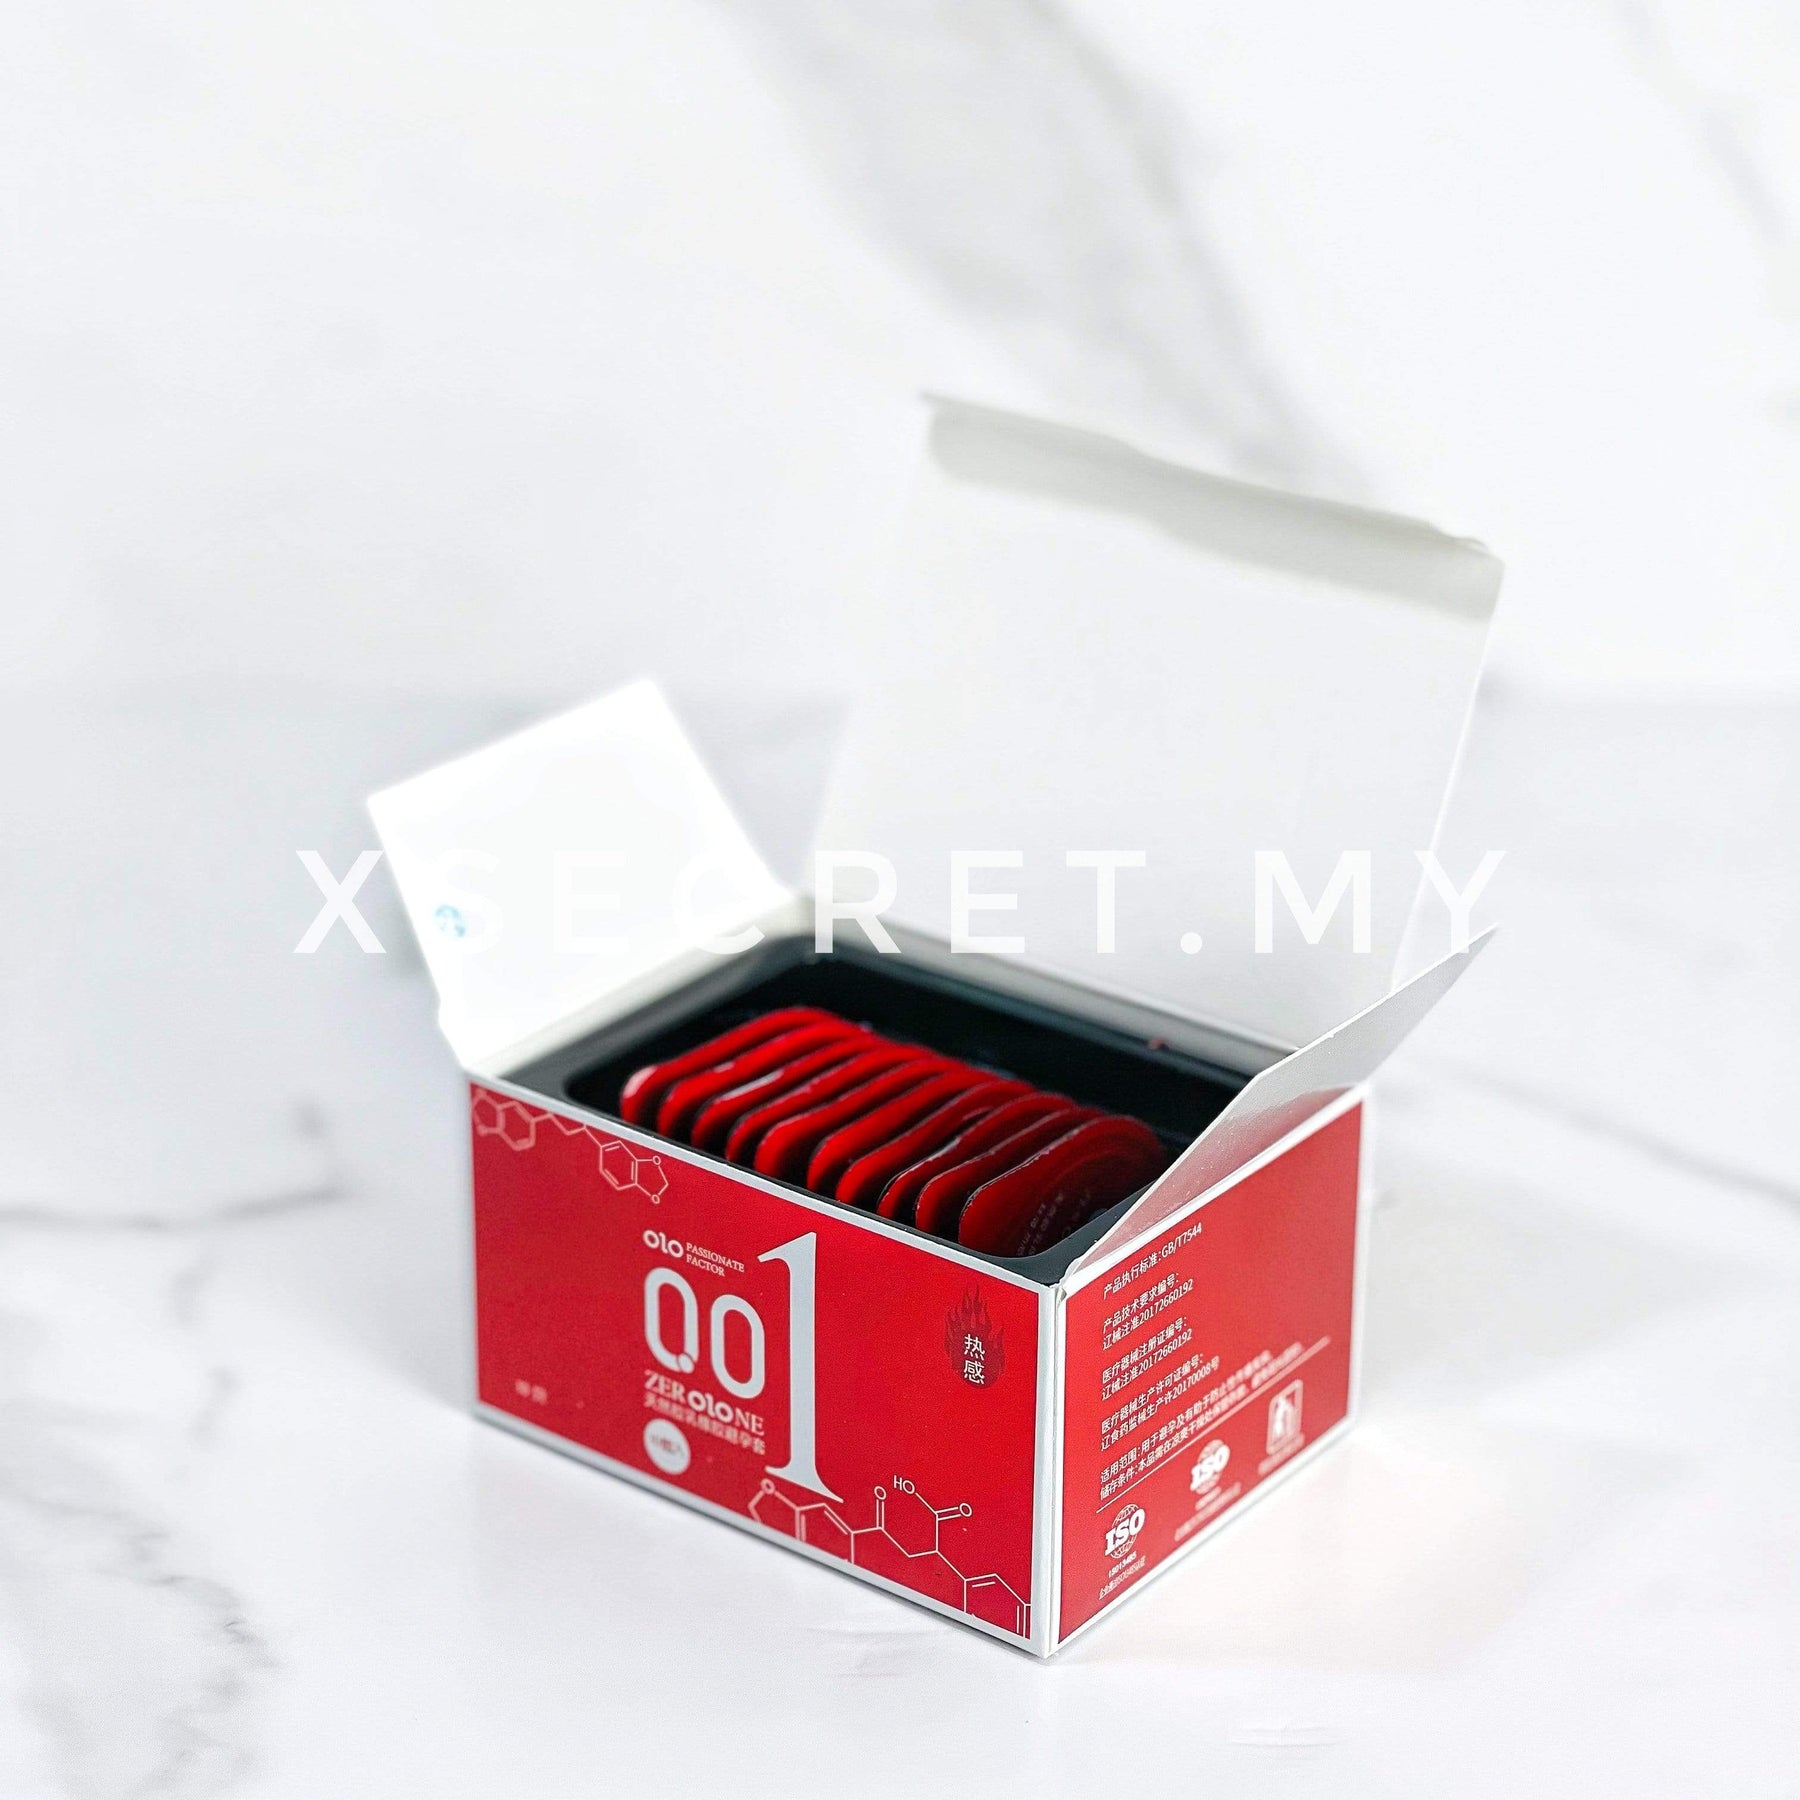 OLO 001 Con-dom 10Pcs 0.01mm Thinnest Long lasting OLO 0.01 Water Base Natural Latex